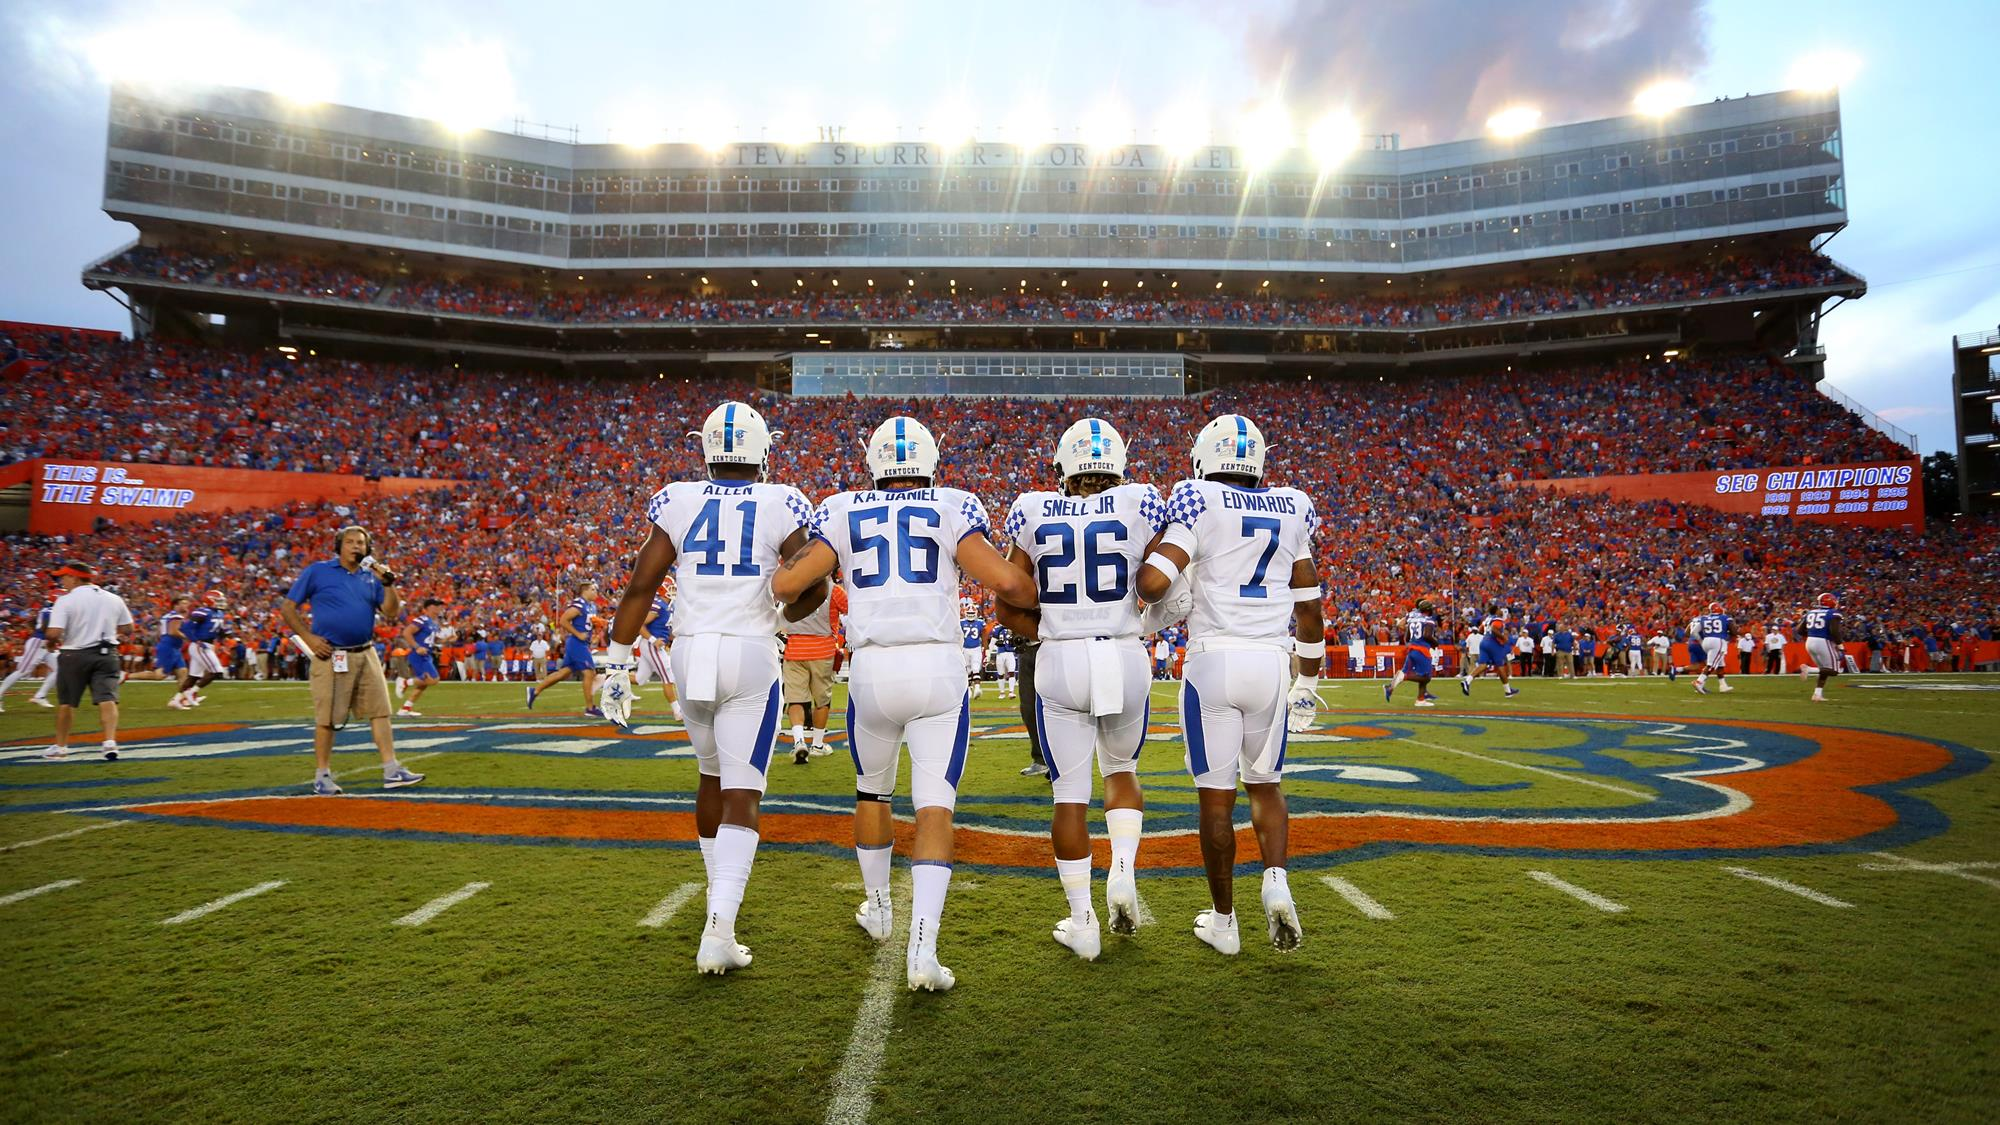 New Challenge, Same Approach: UK Moves from Florida to Murray